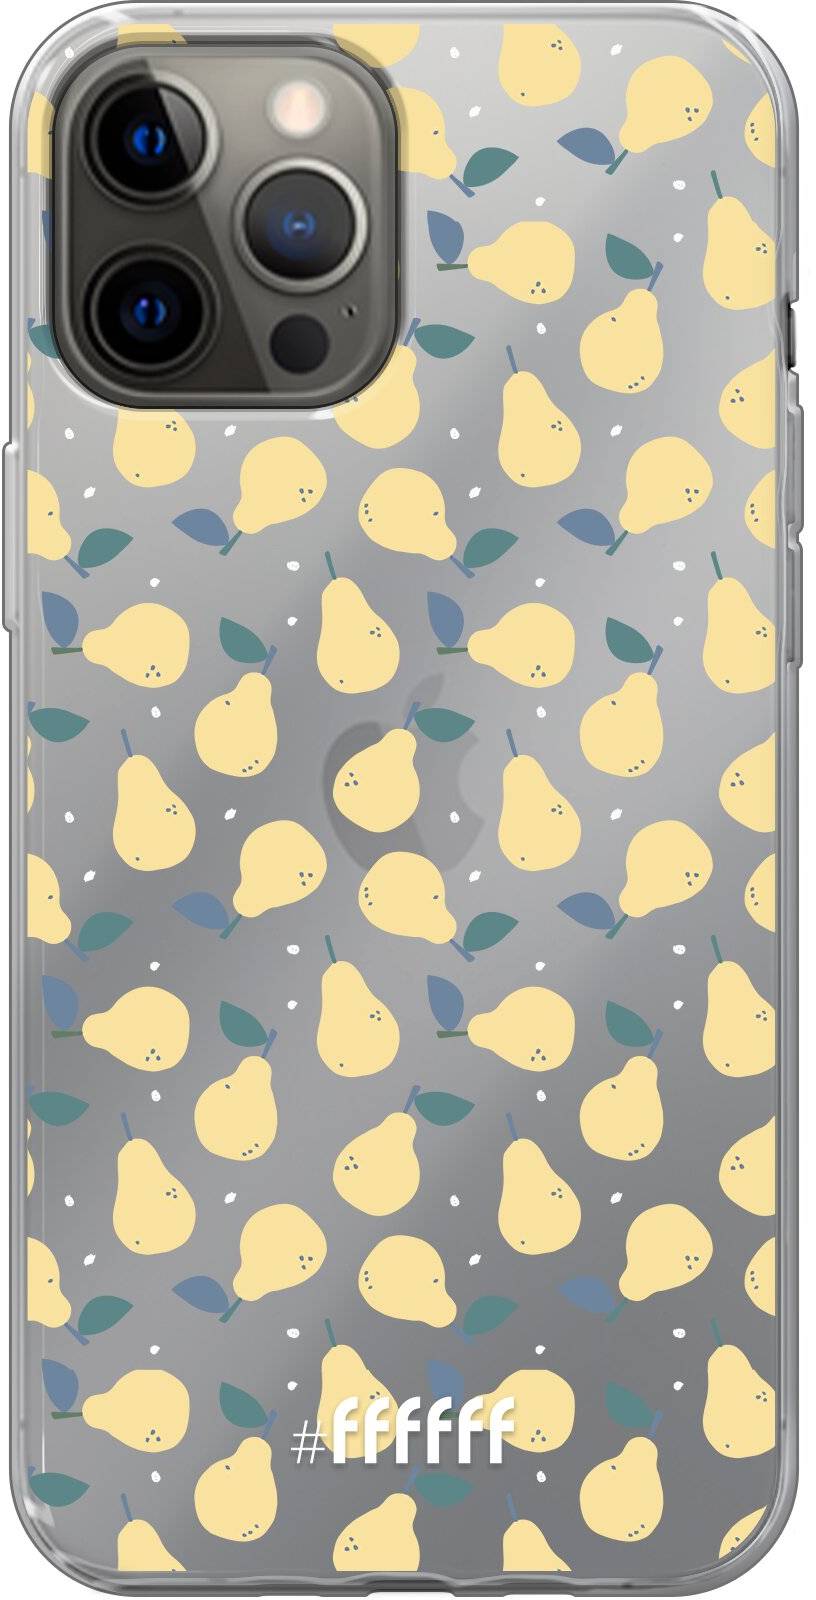 Pears iPhone 12 Pro Max